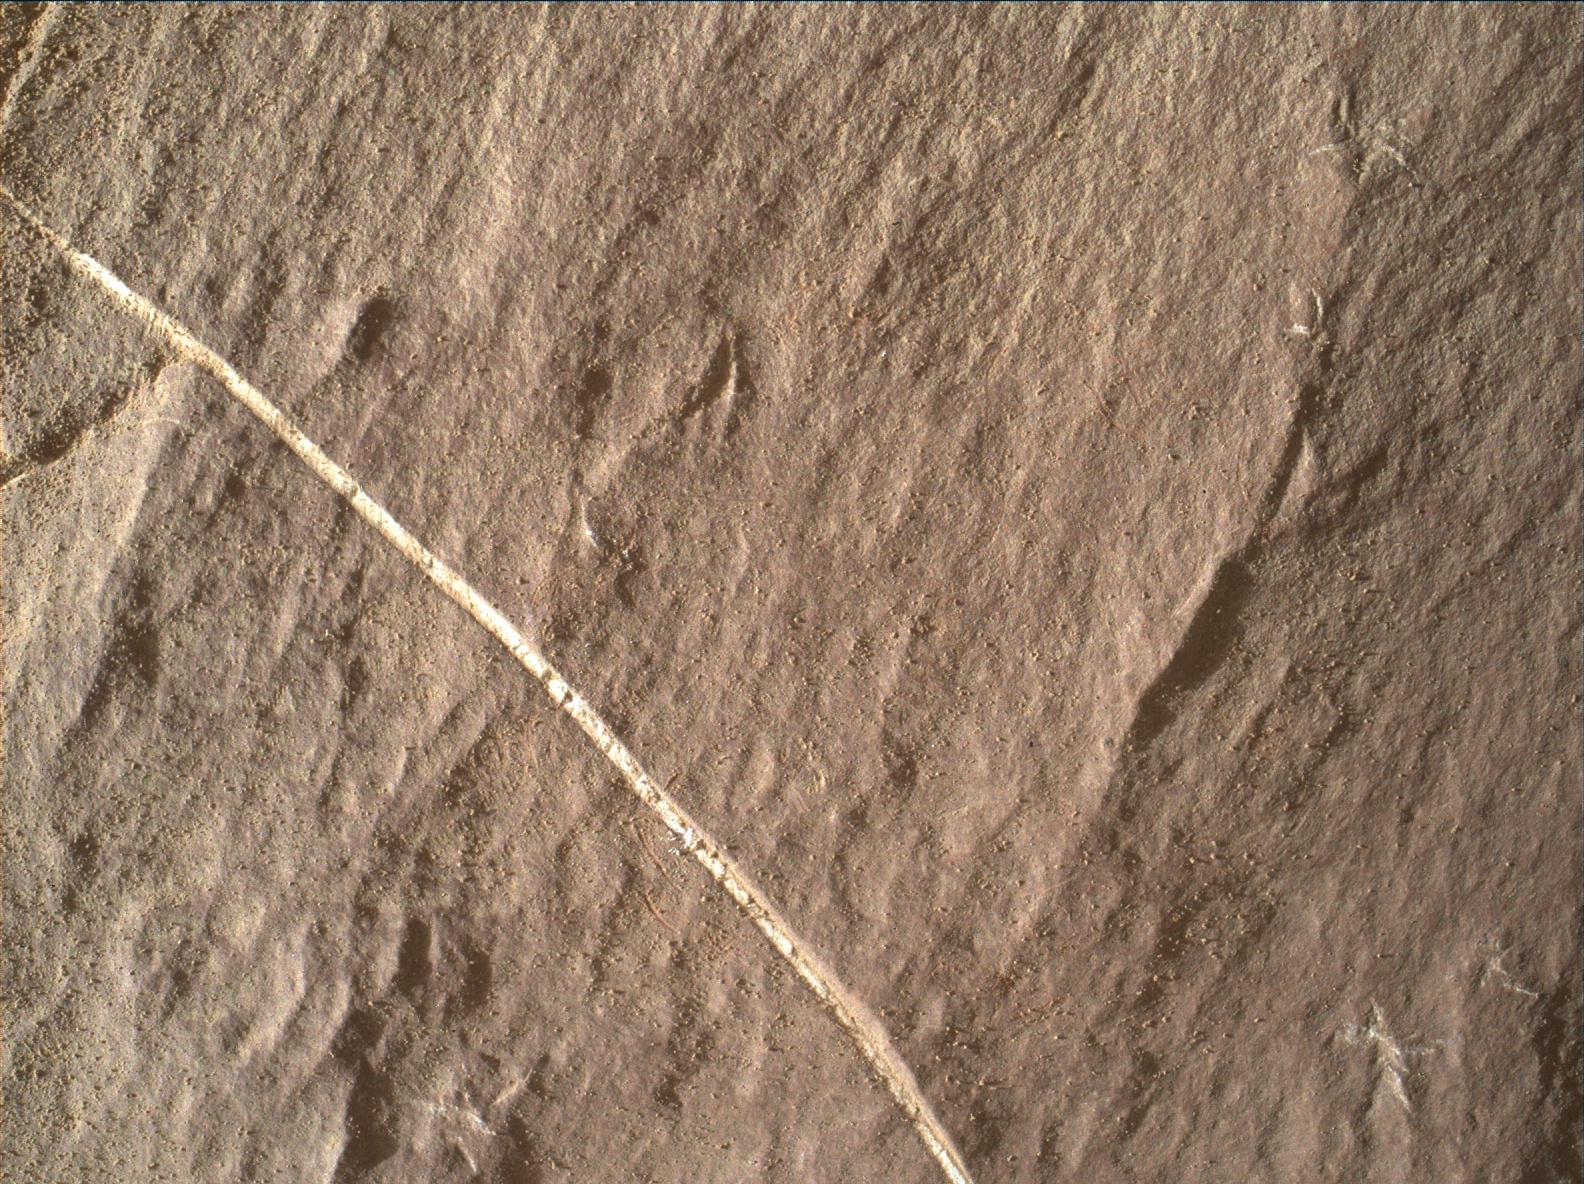 Nasa's Mars rover Curiosity acquired this image using its Mars Hand Lens Imager (MAHLI) on Sol 1867